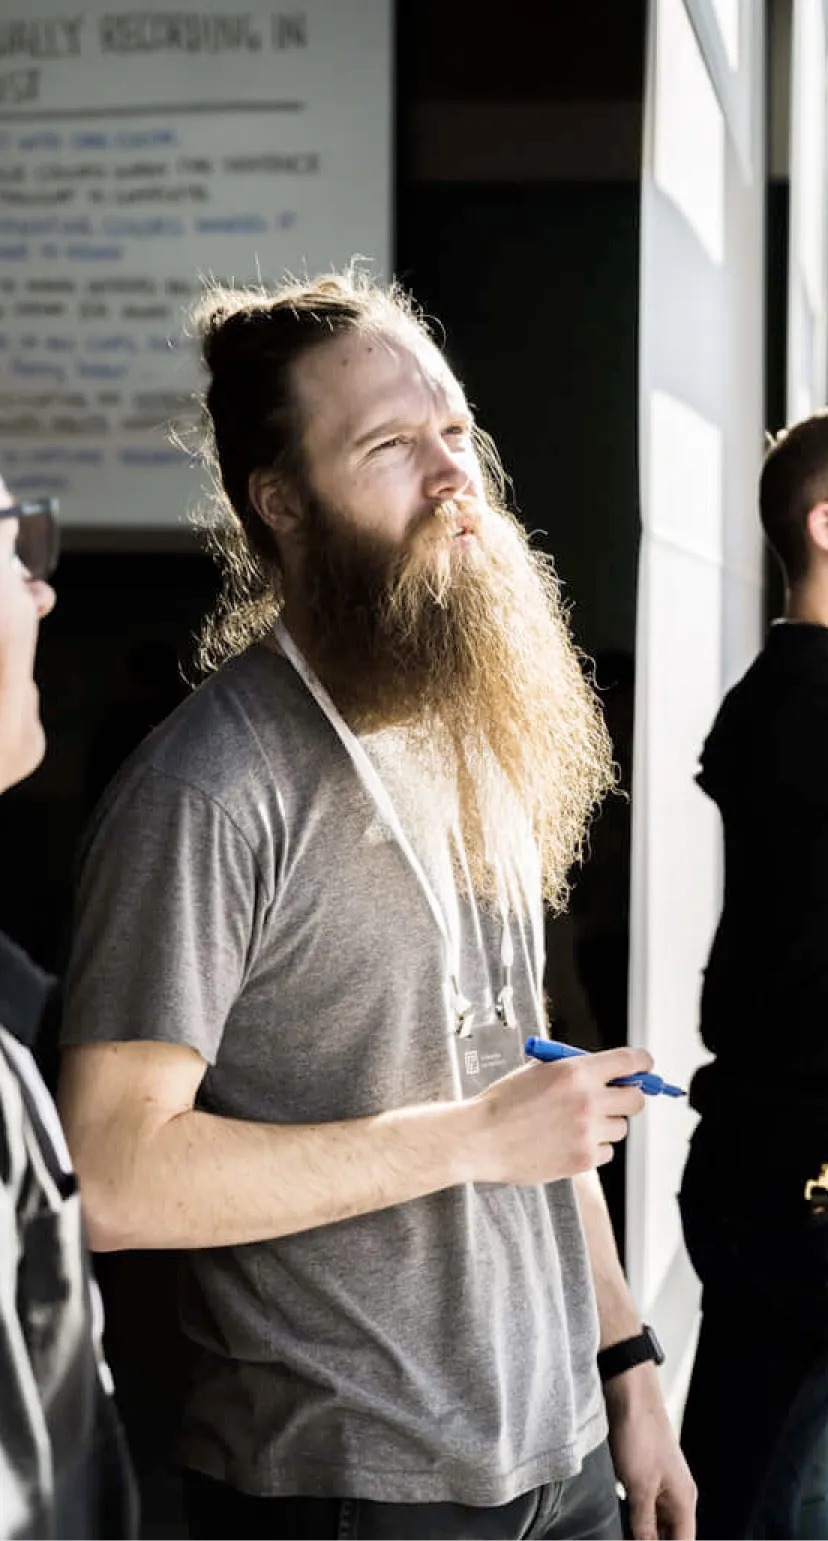 Photo of a man with a long beard and contemplative expression, wearing a grey t-shirt and a conference attendee lanyard, standing in a sunlit area.